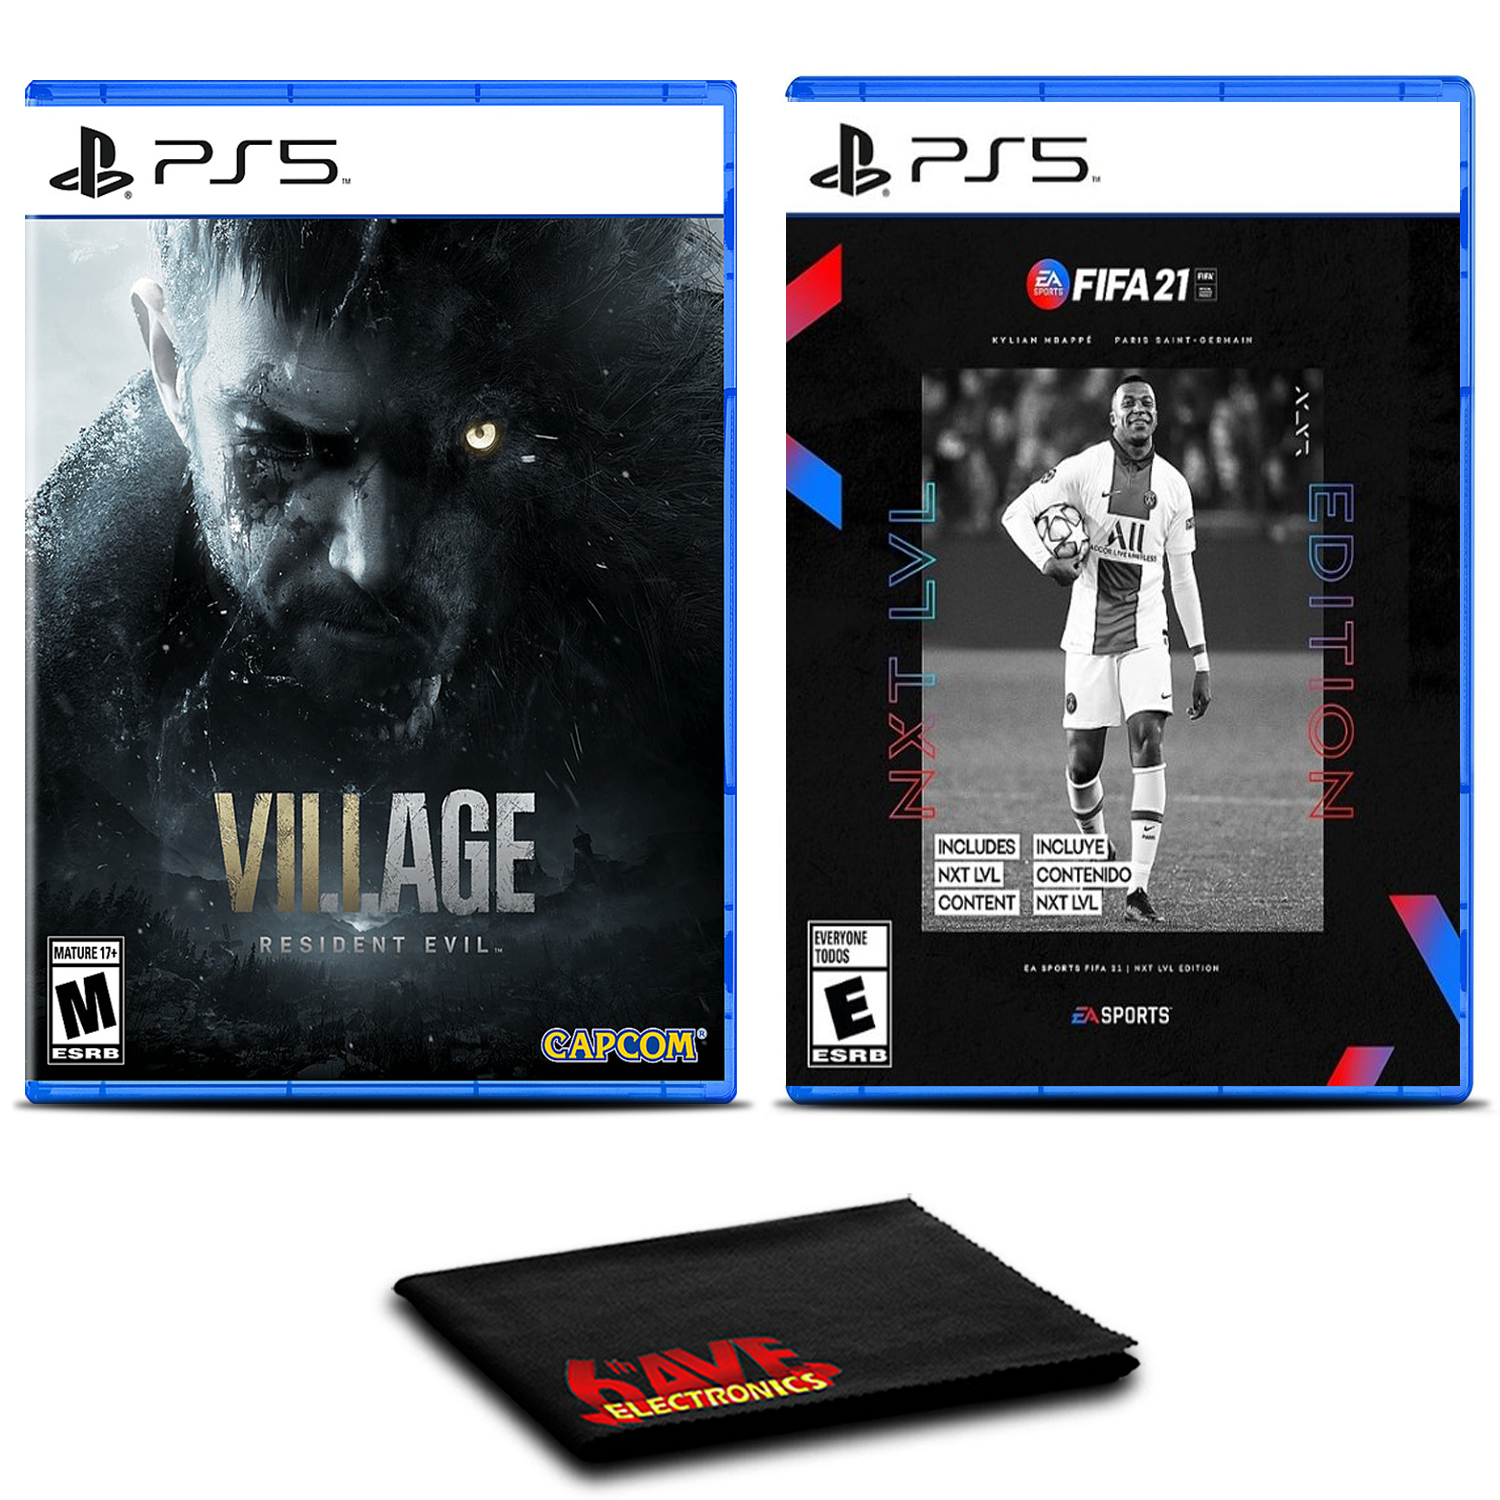 Resident Evil Village And FIFA 21 Next Level - Two Games For PS5 - $133.85